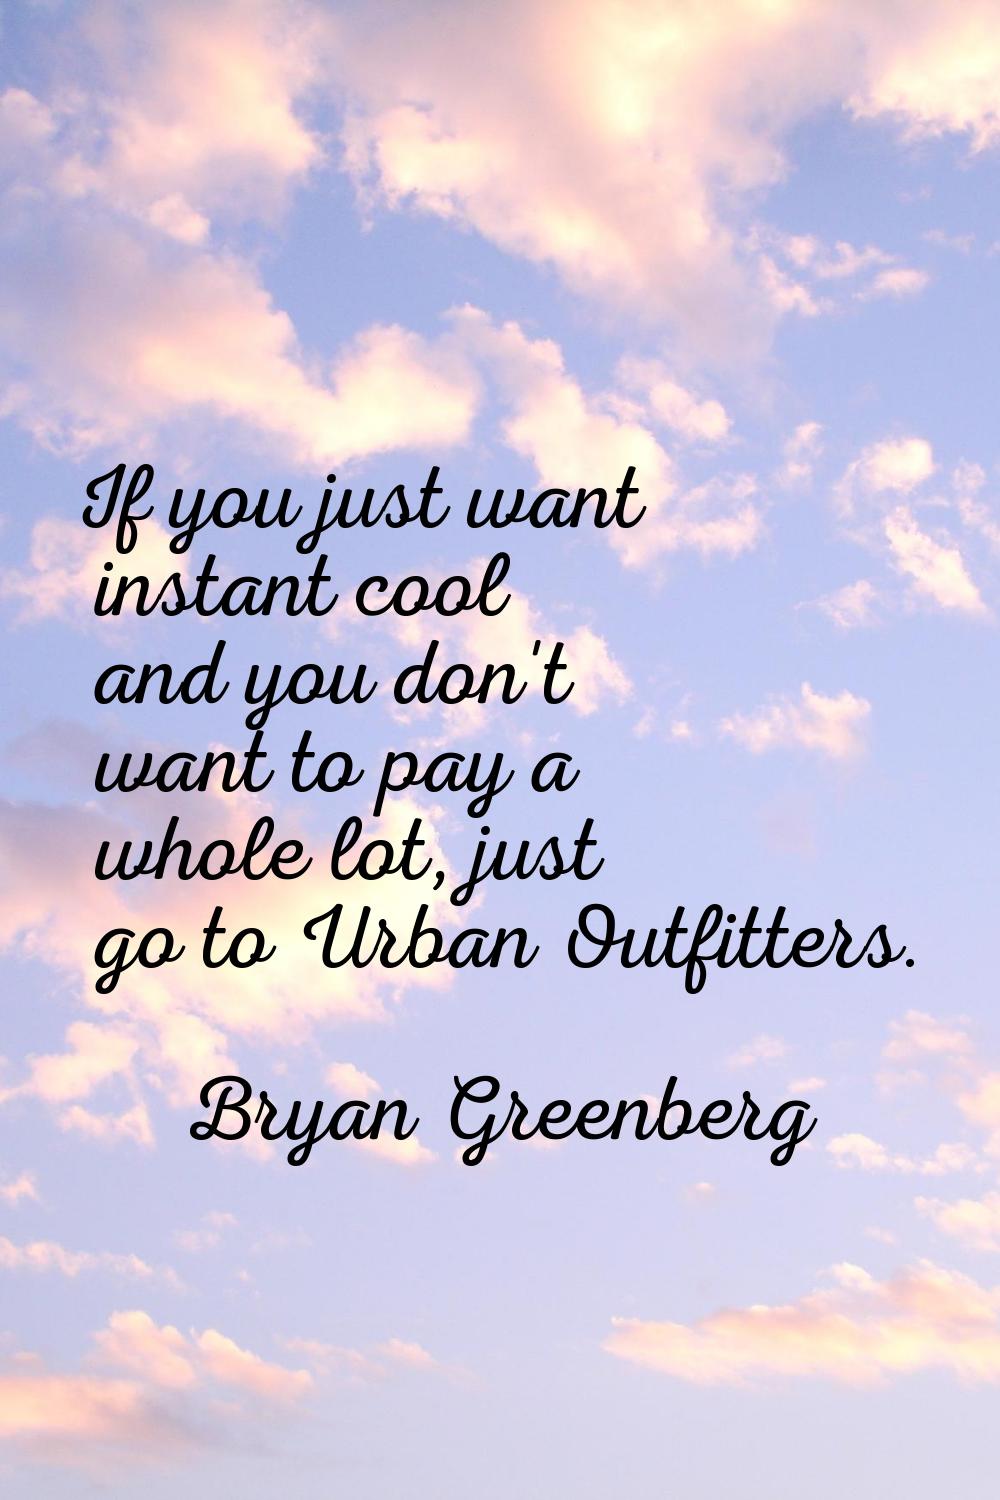 If you just want instant cool and you don't want to pay a whole lot, just go to Urban Outfitters.